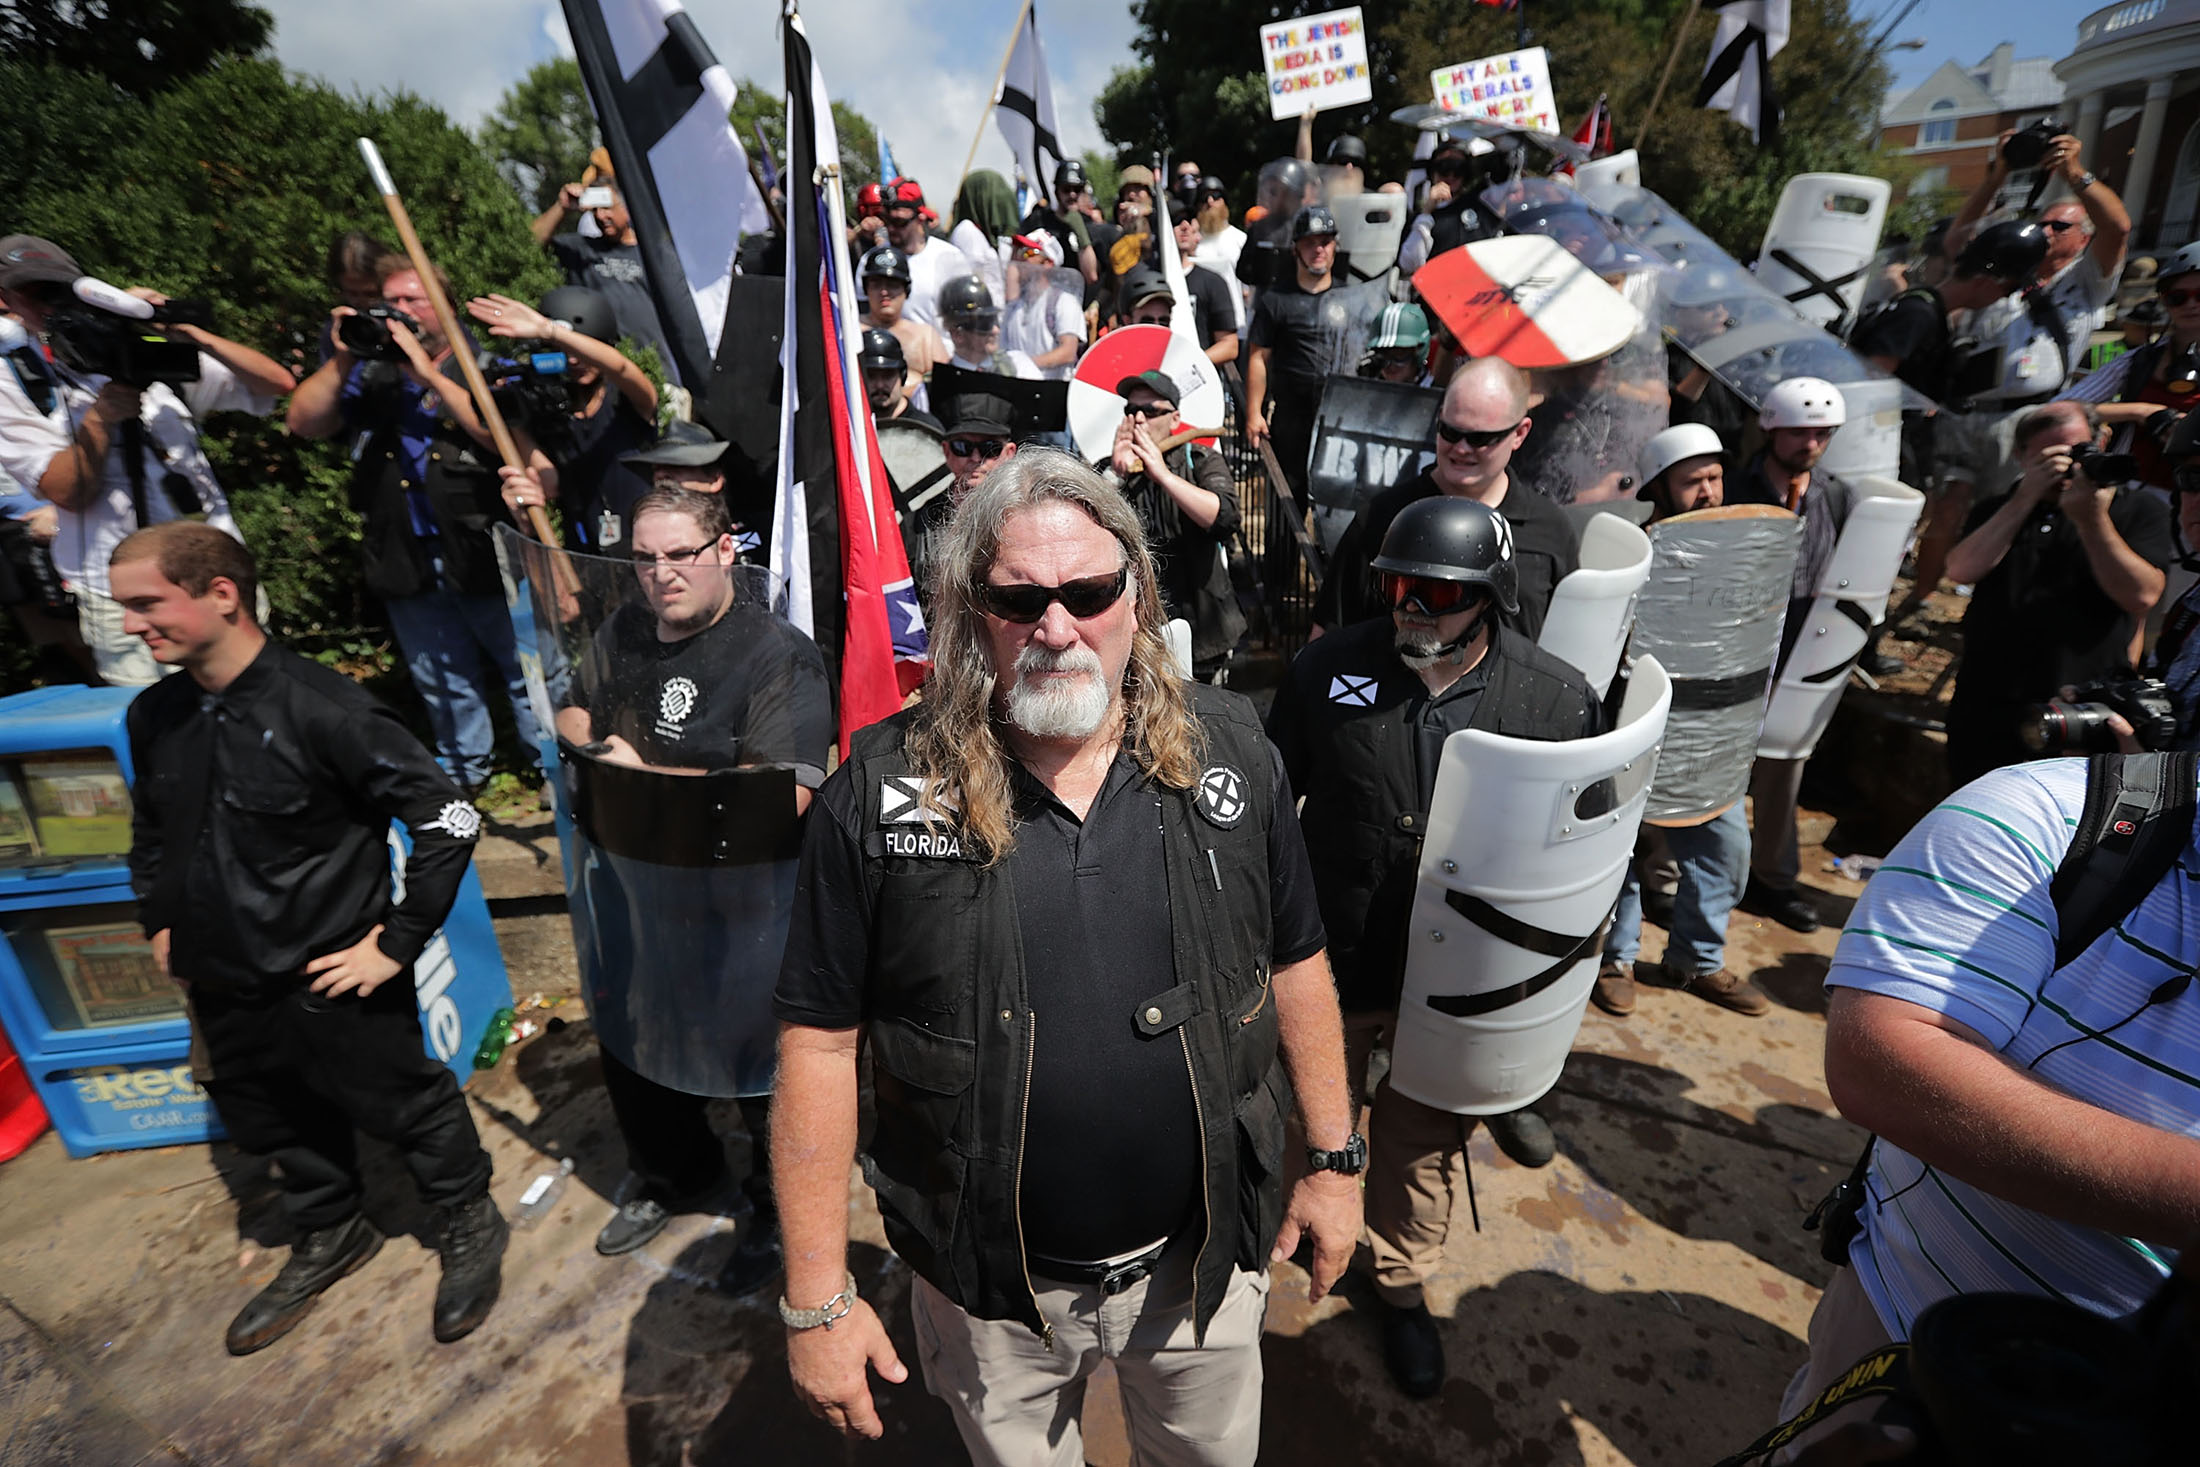 CHARLOTTESVILLE, VA - AUGUST 12: White nationalists, neo-Nazis and members of the 'alt-right' exchange insluts with counter-protesters as they attempt to guard the entrance to Emancipation Park during the 'Unite the Right' rally August 12, 2017 in Charlottesville, Virginia. After clashes with anti-fascist protesters and police the rally was declared an unlawful gathering and people were forced out of Emancipation Park, where a statue of Confederate General Robert E. Lee is slated to be removed.
